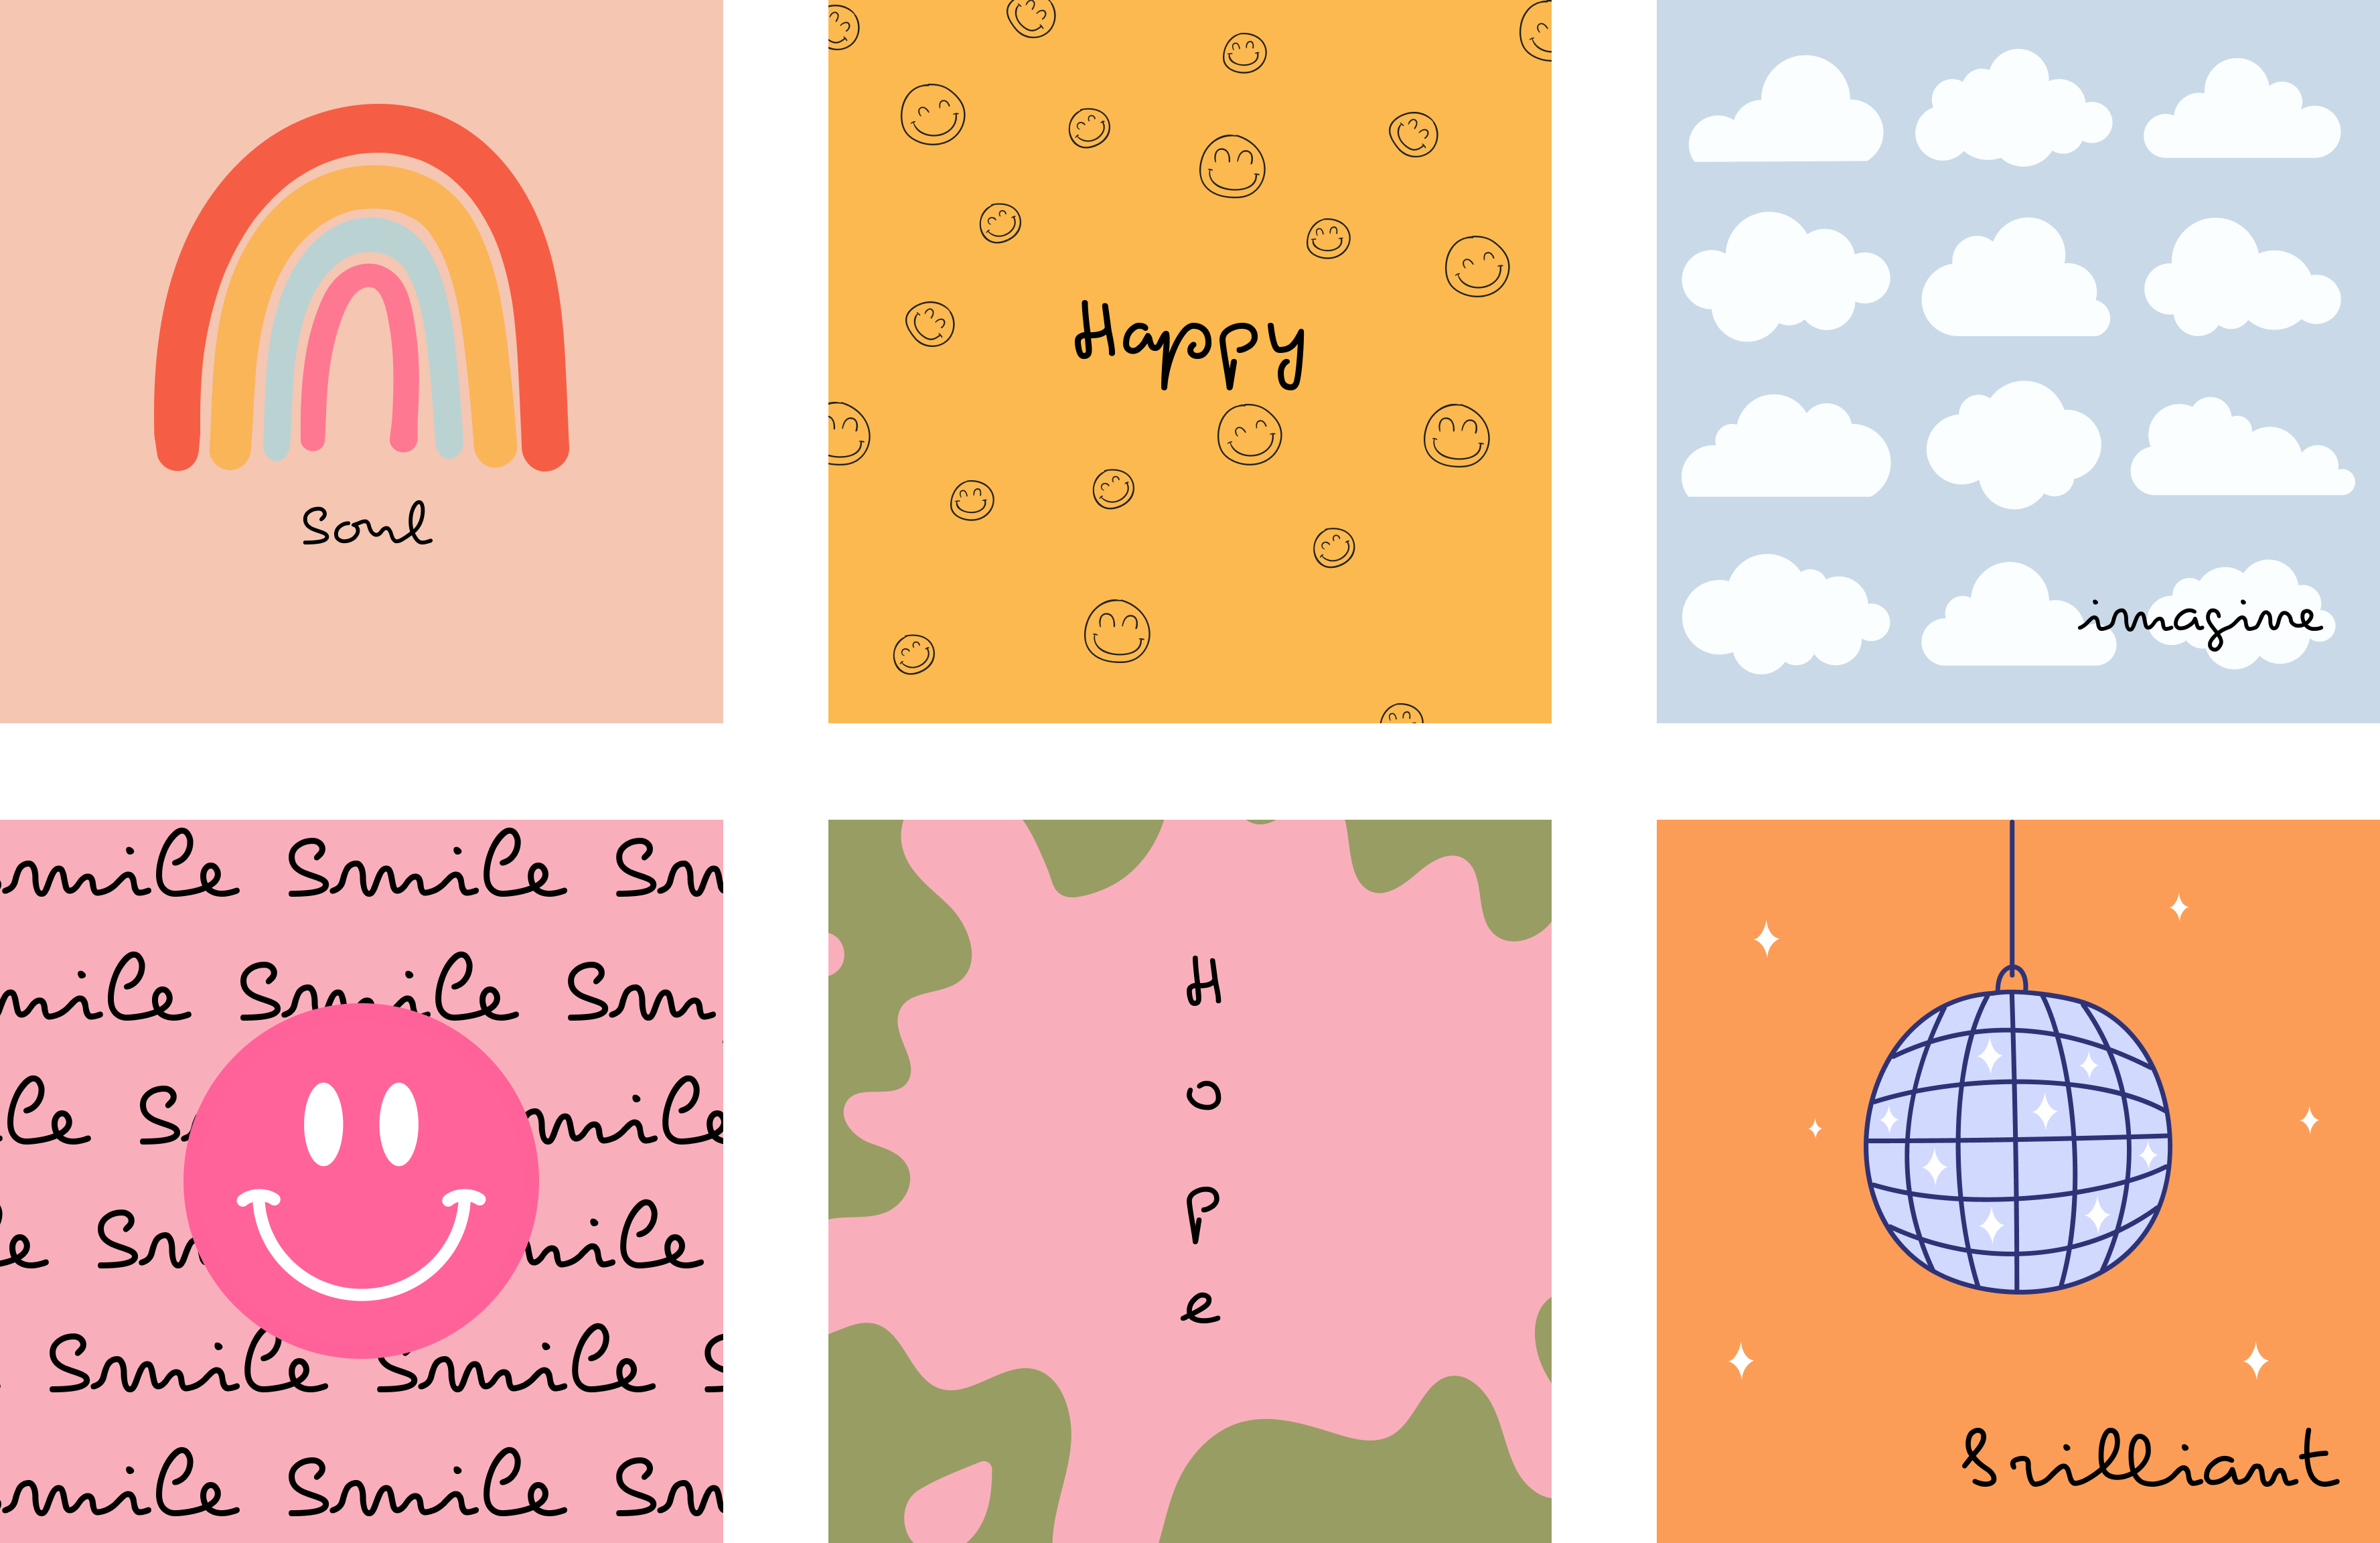 A series of cards with different colors and designs - Pansexual